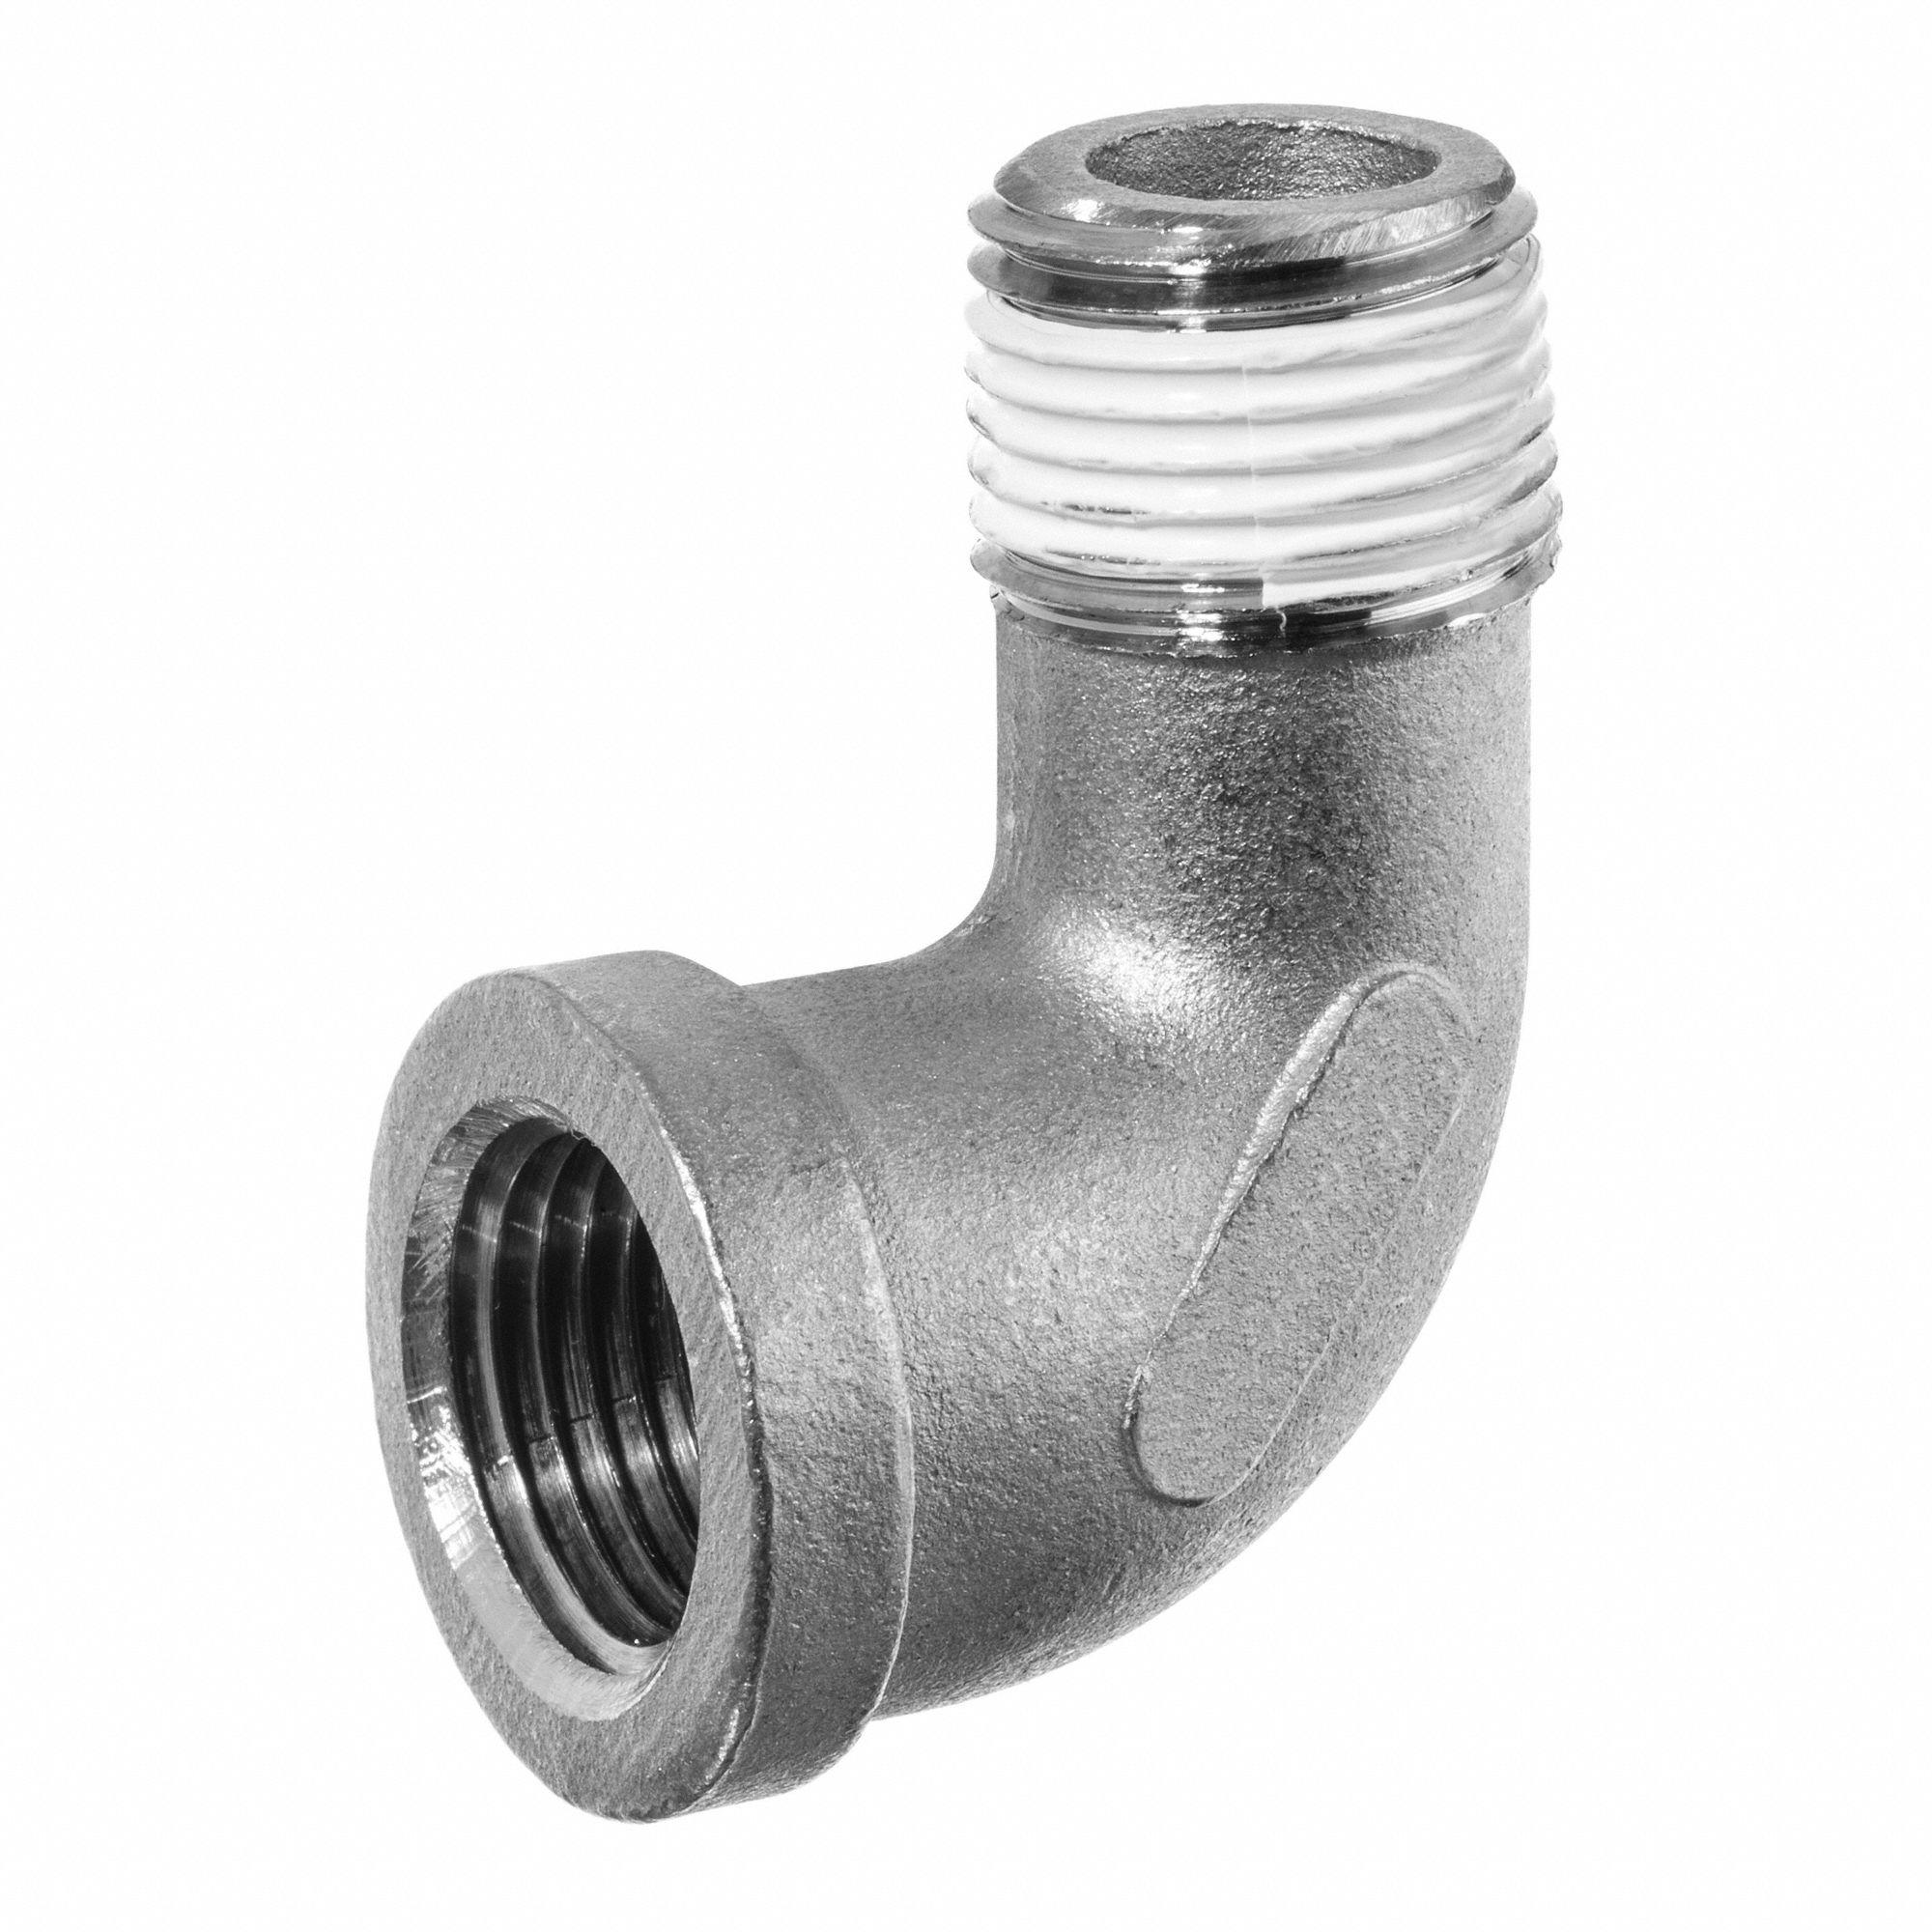 Stainless Steel 304 Cast Pipe Fitting 90 Degree Street Elbow Class 150 1/2" NPT 